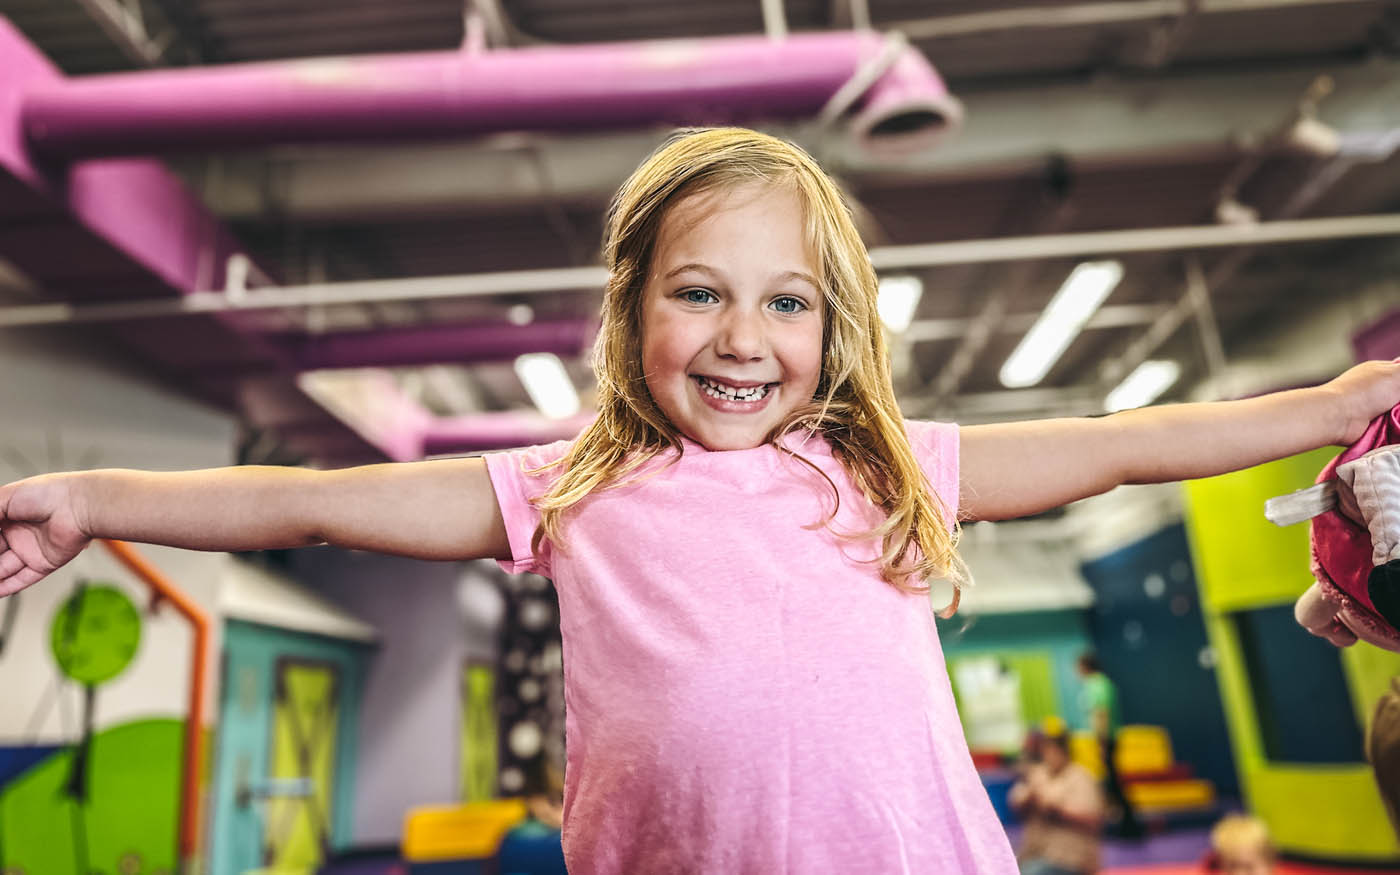 An about 5 year old girl playing in Romp n' Roll Northwest Charlotte's gym.